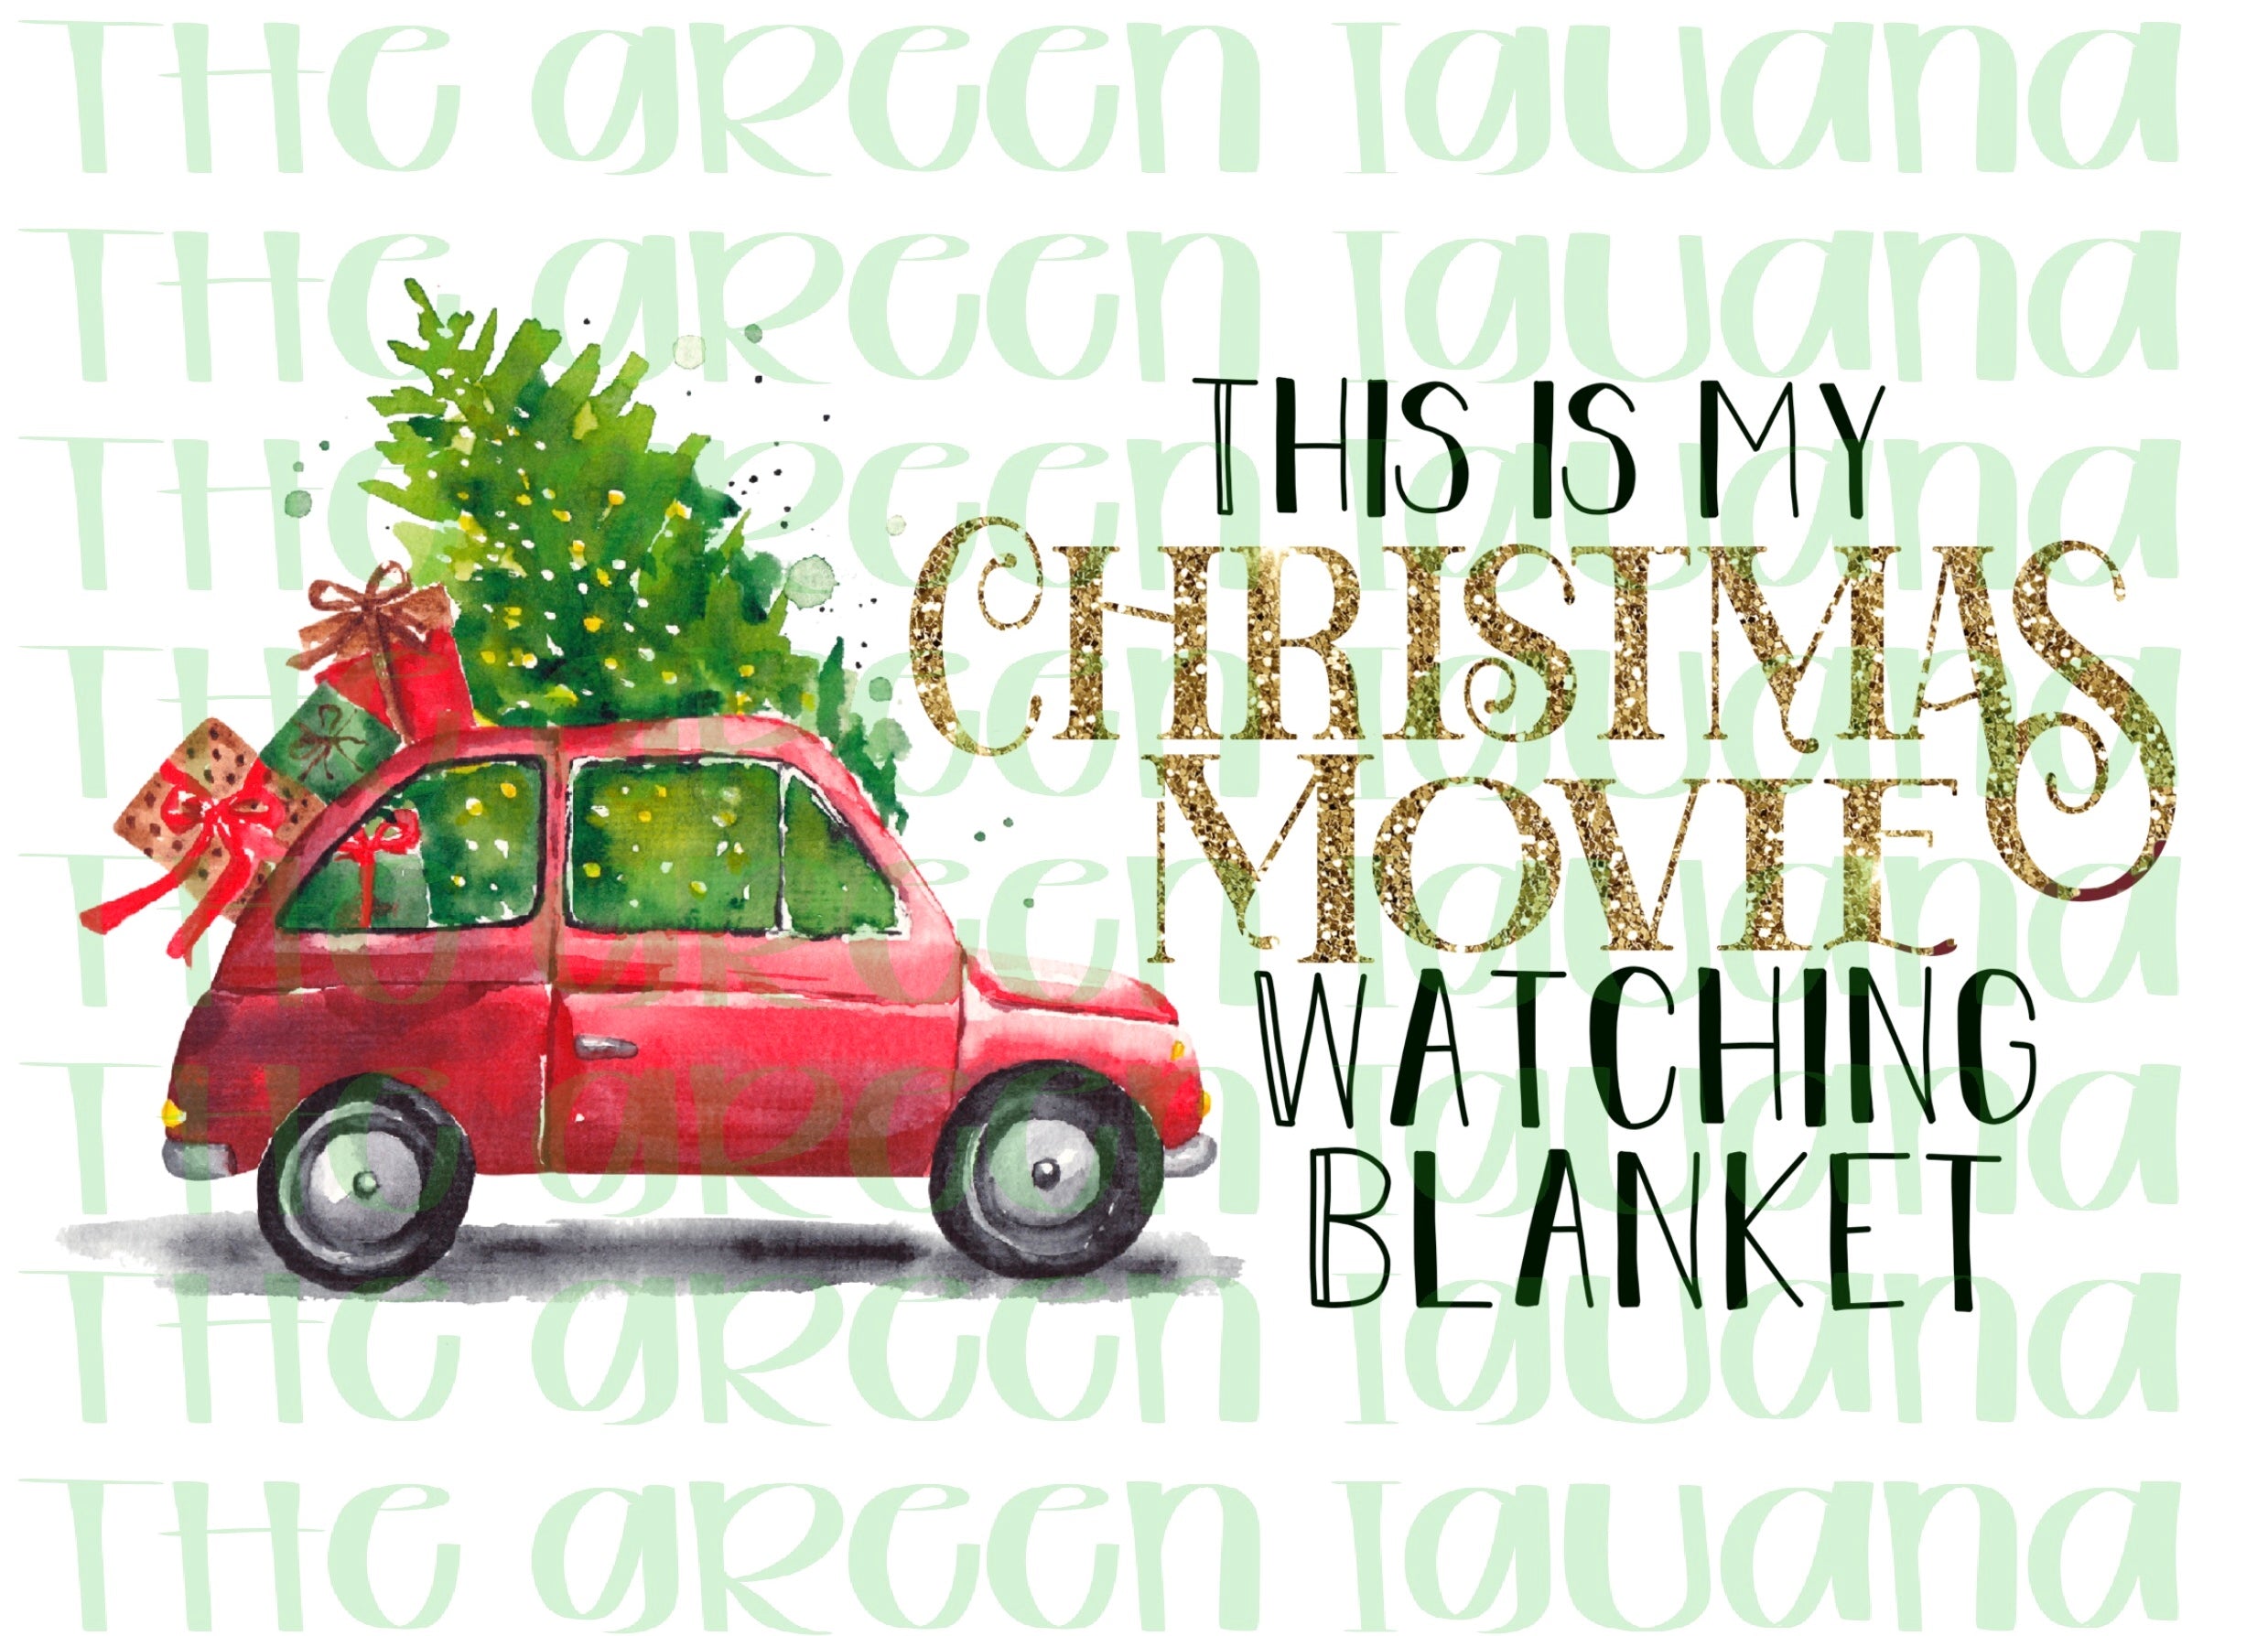 This is my Christmas movie watching blanket - DTF transfer